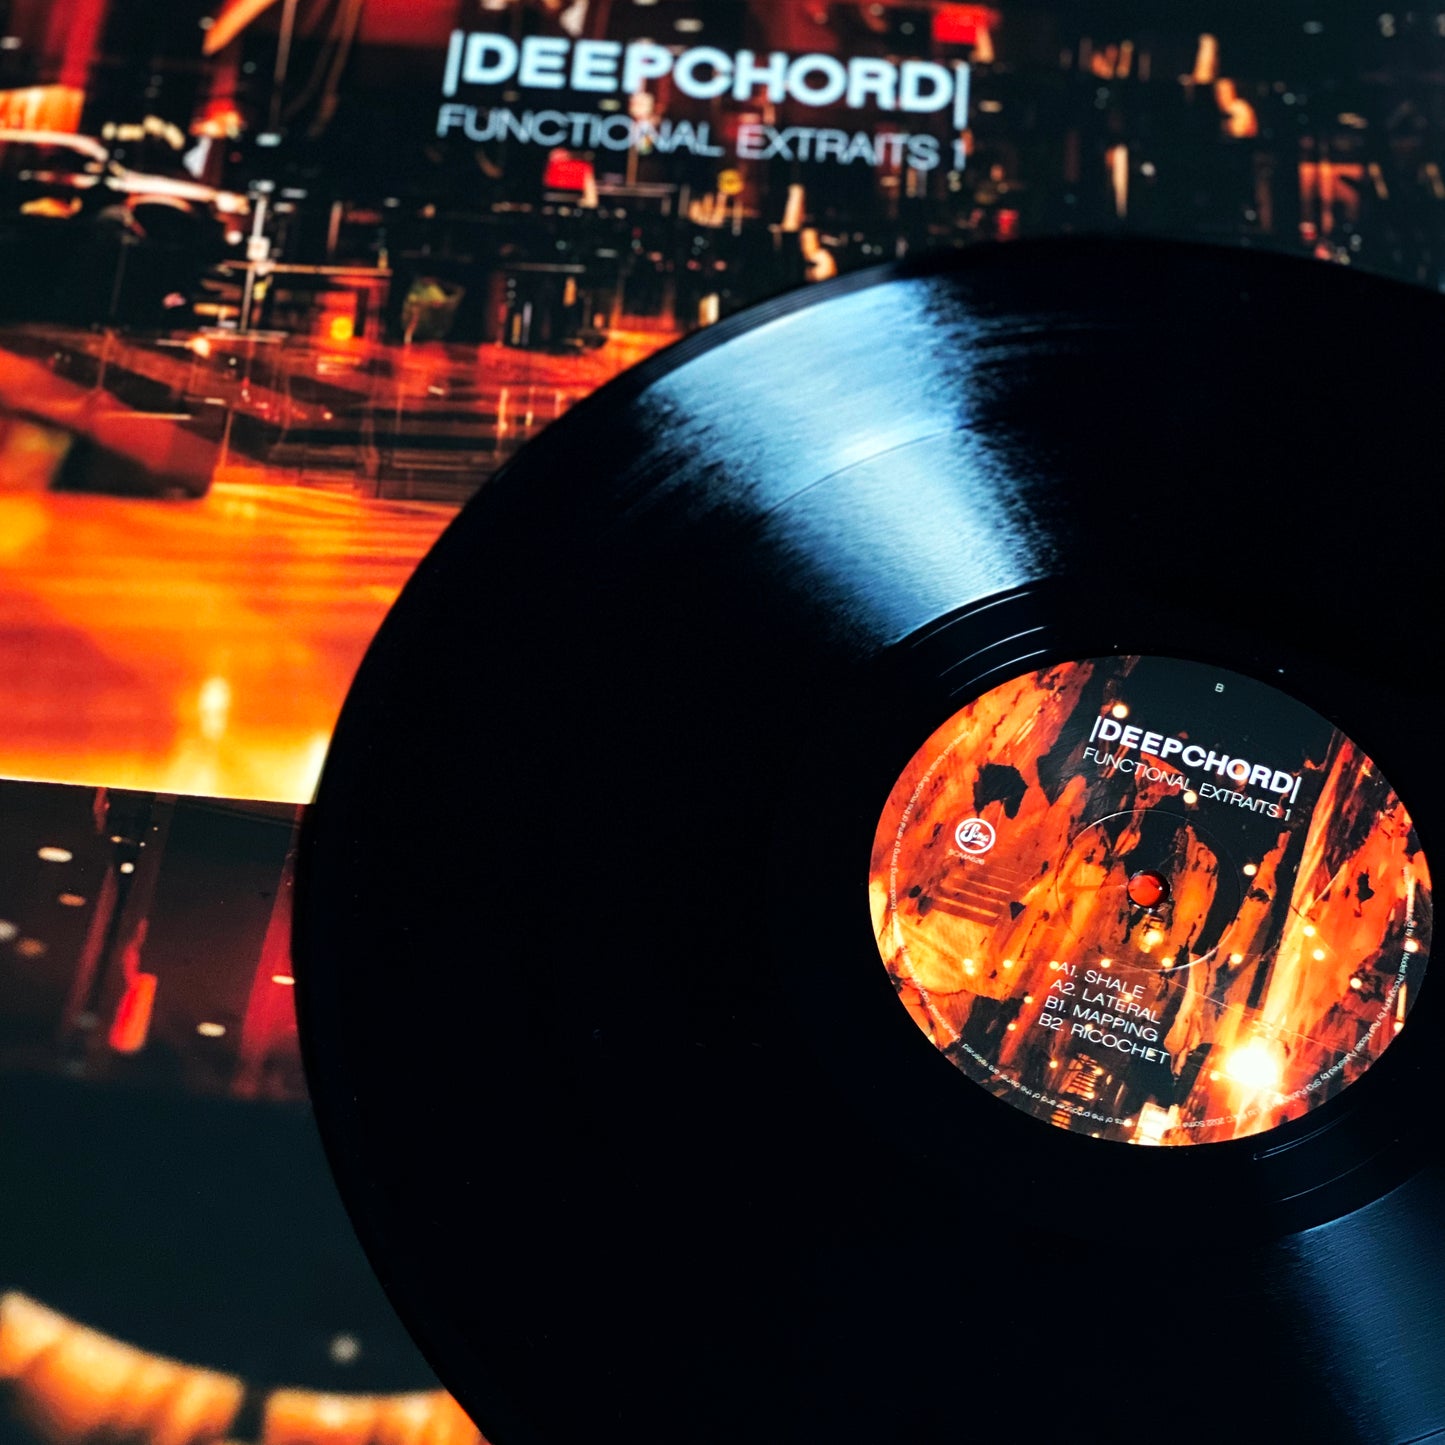 Deepchord – Functional Extraits 1